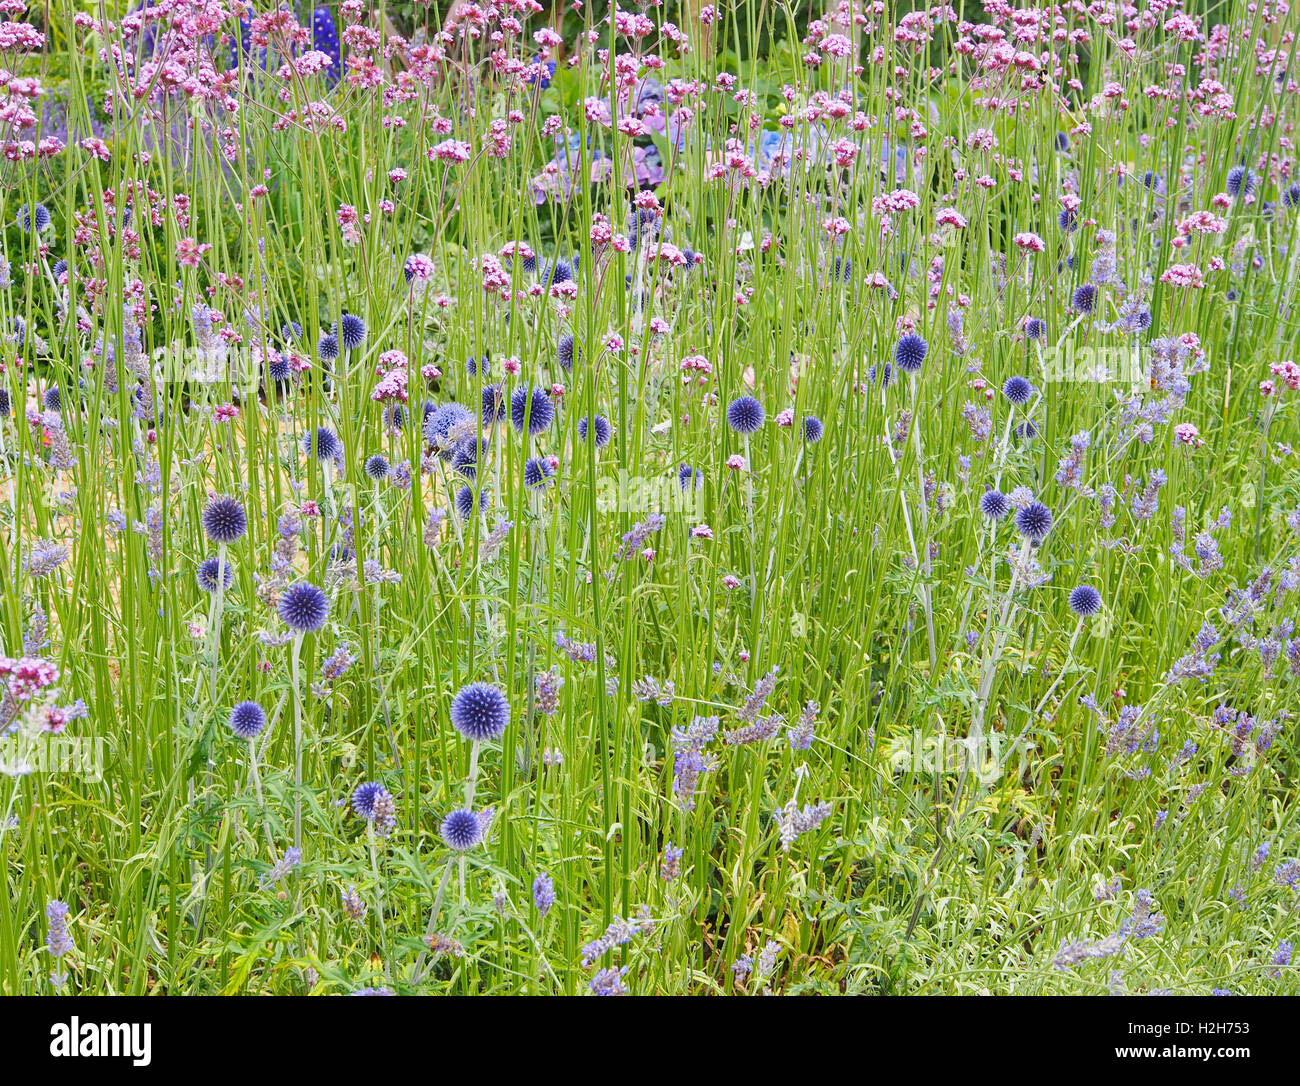 Verbena growing in a wildflower meadow / garden with bright blue Echinops ritro globe thistle at the RHS flower show at Tatton Park in Cheshire 2016. Stock Photo